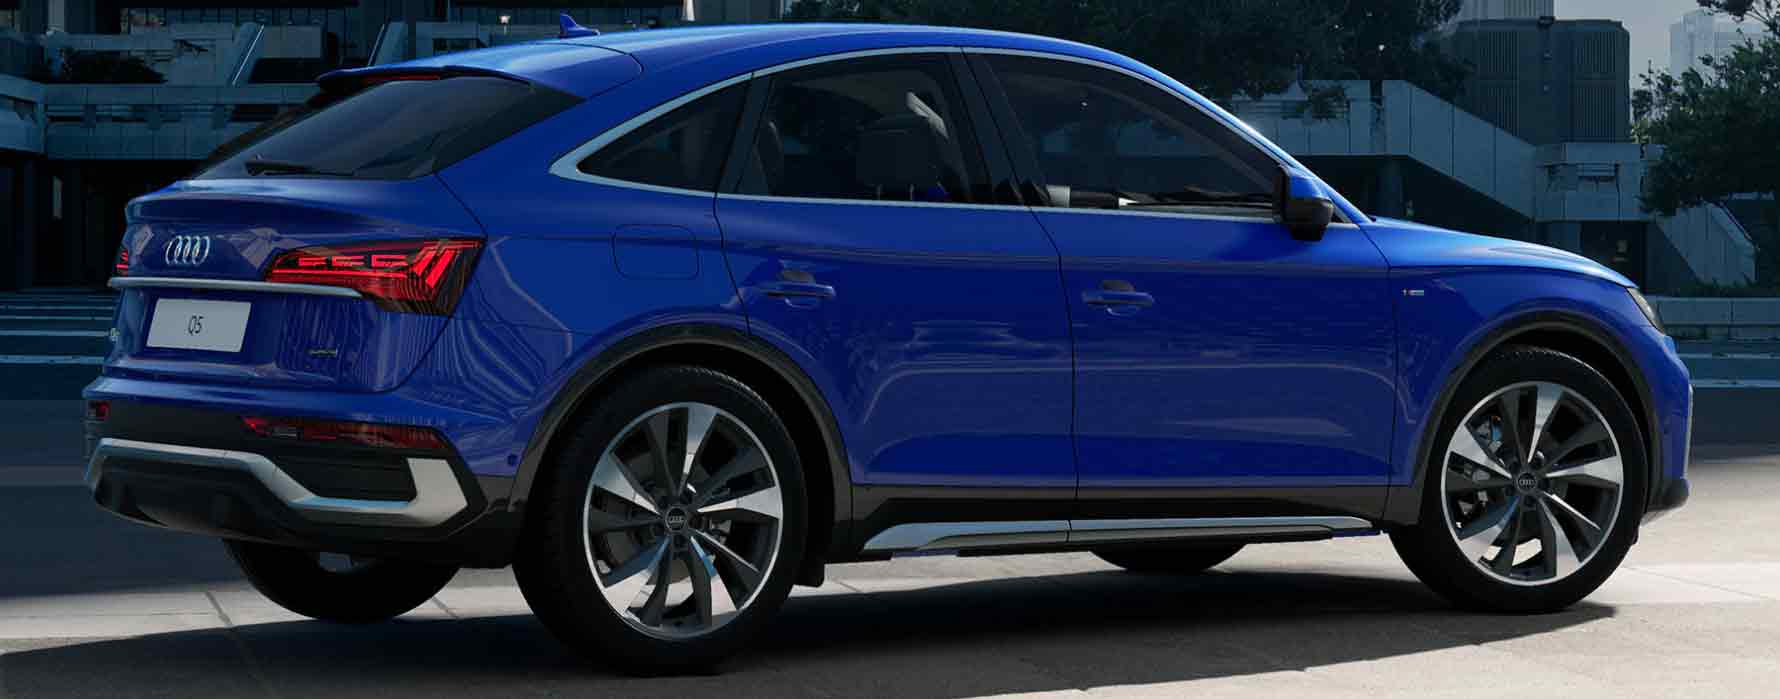 Audi Abu Dhabi welcomes the new Audi Q5 and all-new Audi Q5 Sportback to its line-up